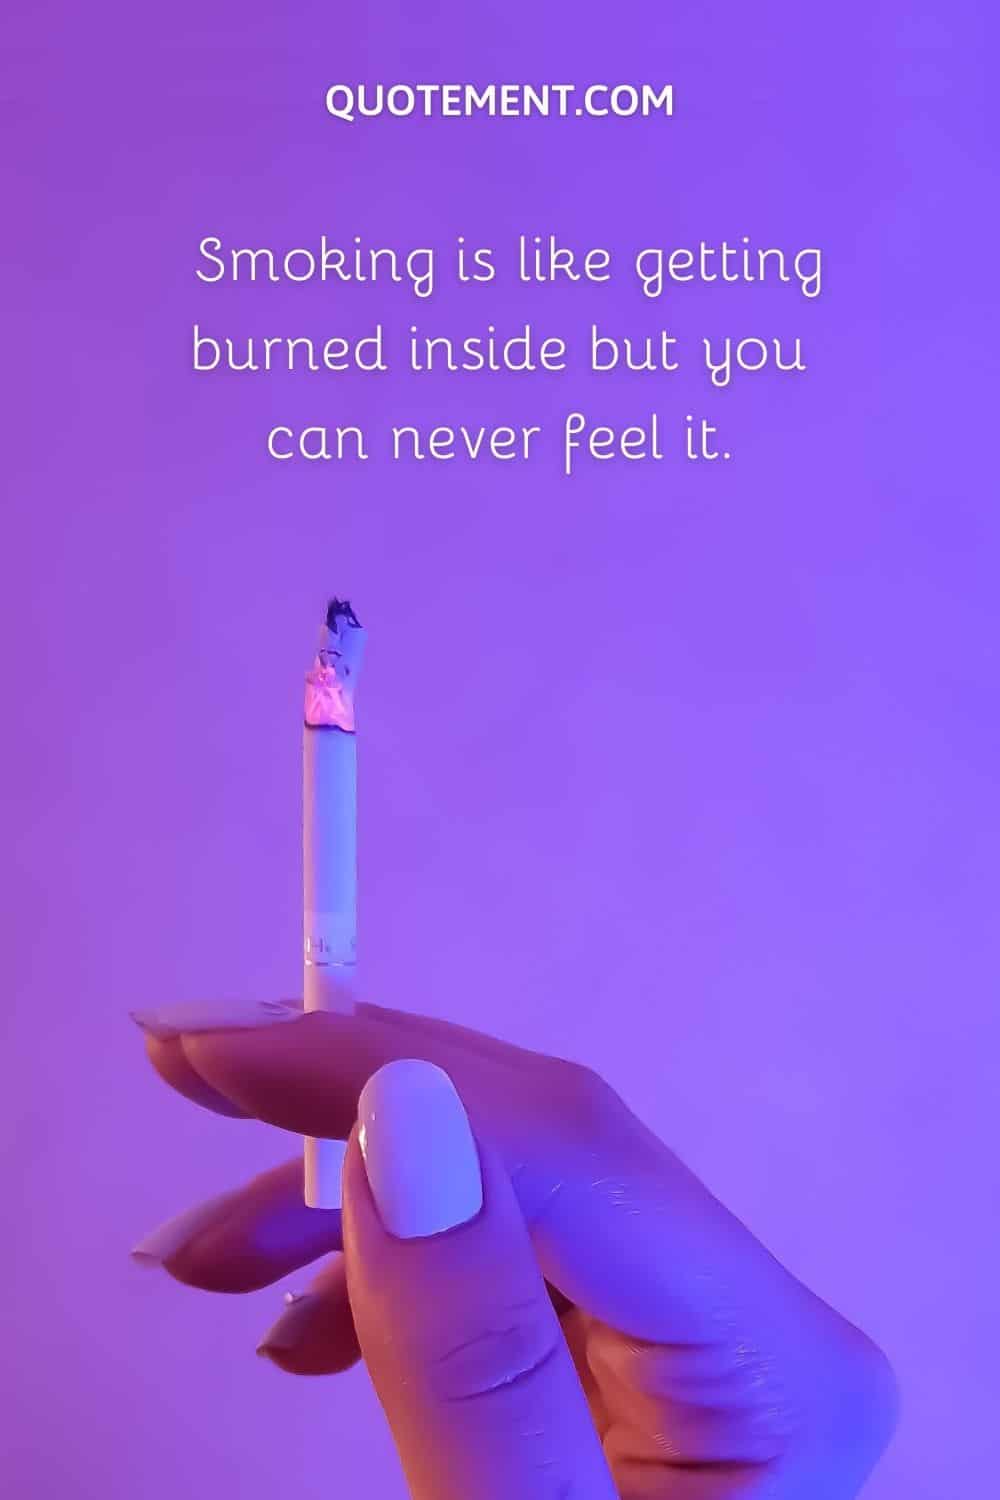 Smoking is like getting burned inside but you can never feel it